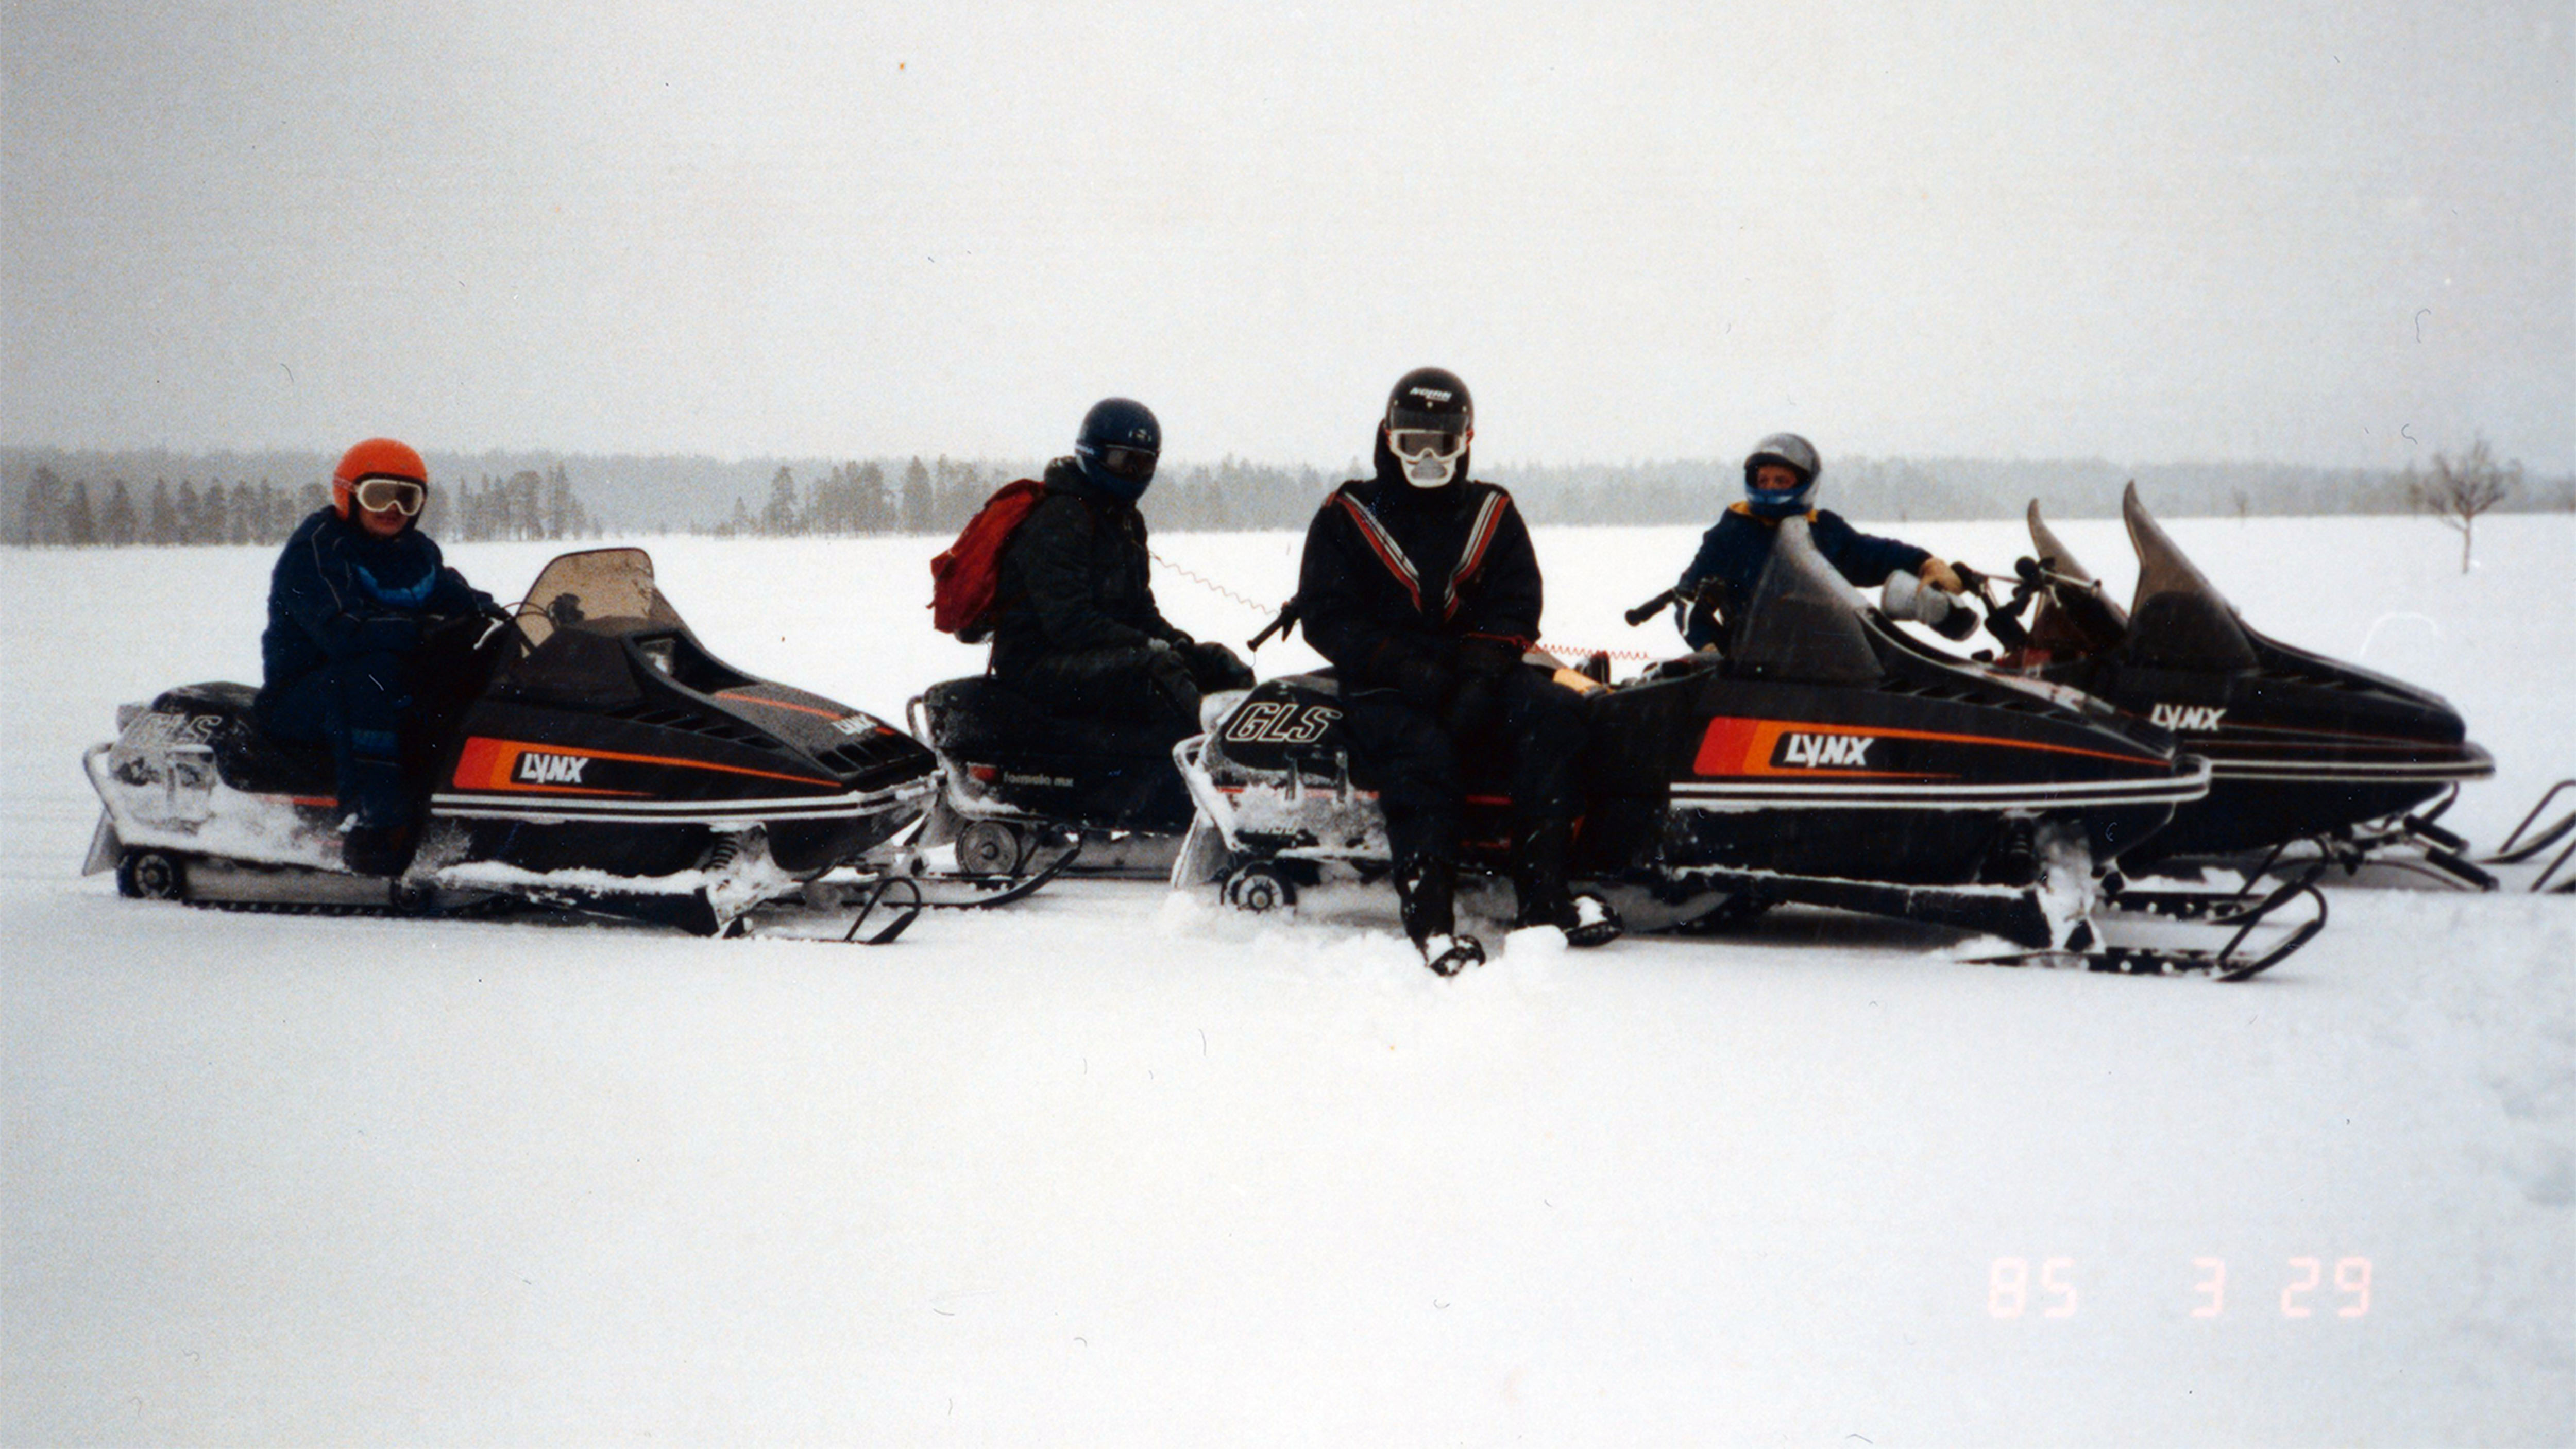 A group of riders taking a break on Lynx snowmobiles in wilderness